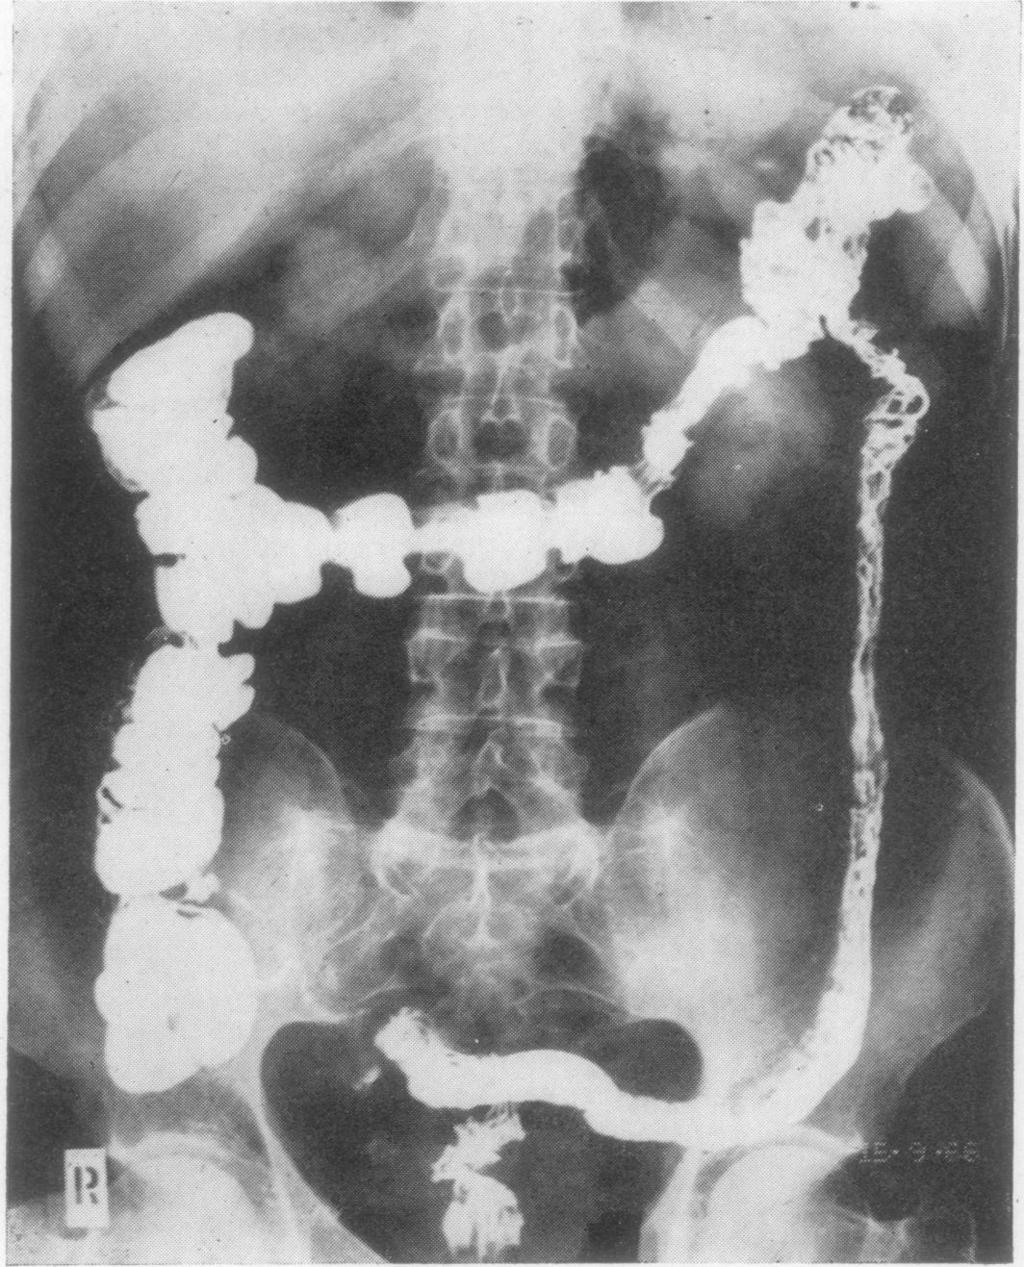 22 ANNALS OF THE RHEUMATIC DISEASES tion and all of them showed the changes of mild ulcerative colitis on x-ray as described by Fennessy, Sparberg, and Kirsner (1966): poor contractions of the bowel,